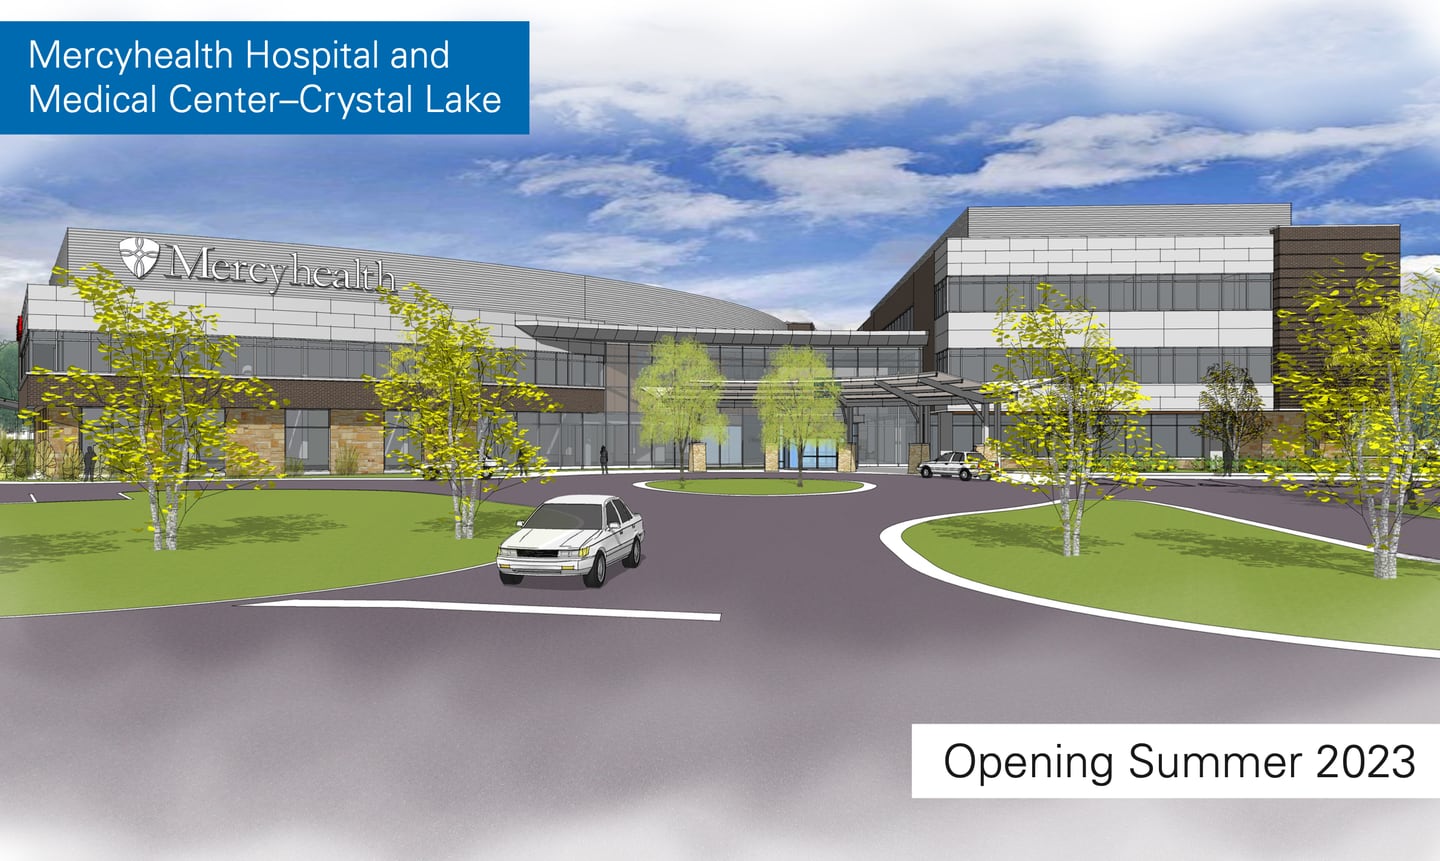 Mercyhealth released renderings following the groundbreaking Wednesday, June 16, 2021, on the new Mercyhealth hospital in Crystal Lake.